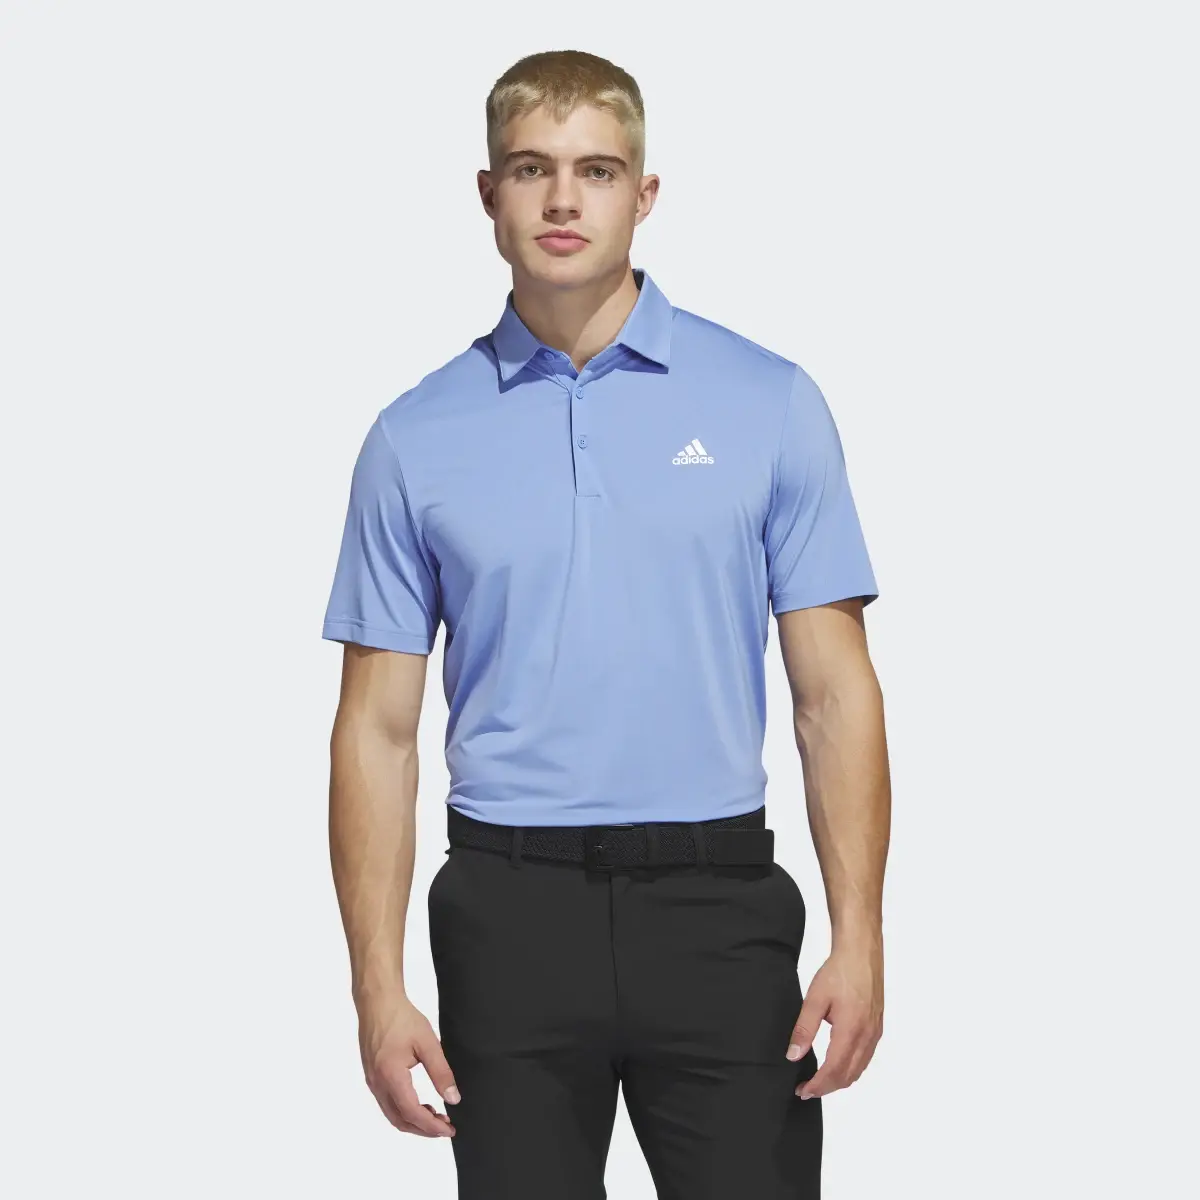 Adidas Ultimate365 Solid Left Chest Poloshirt. 2